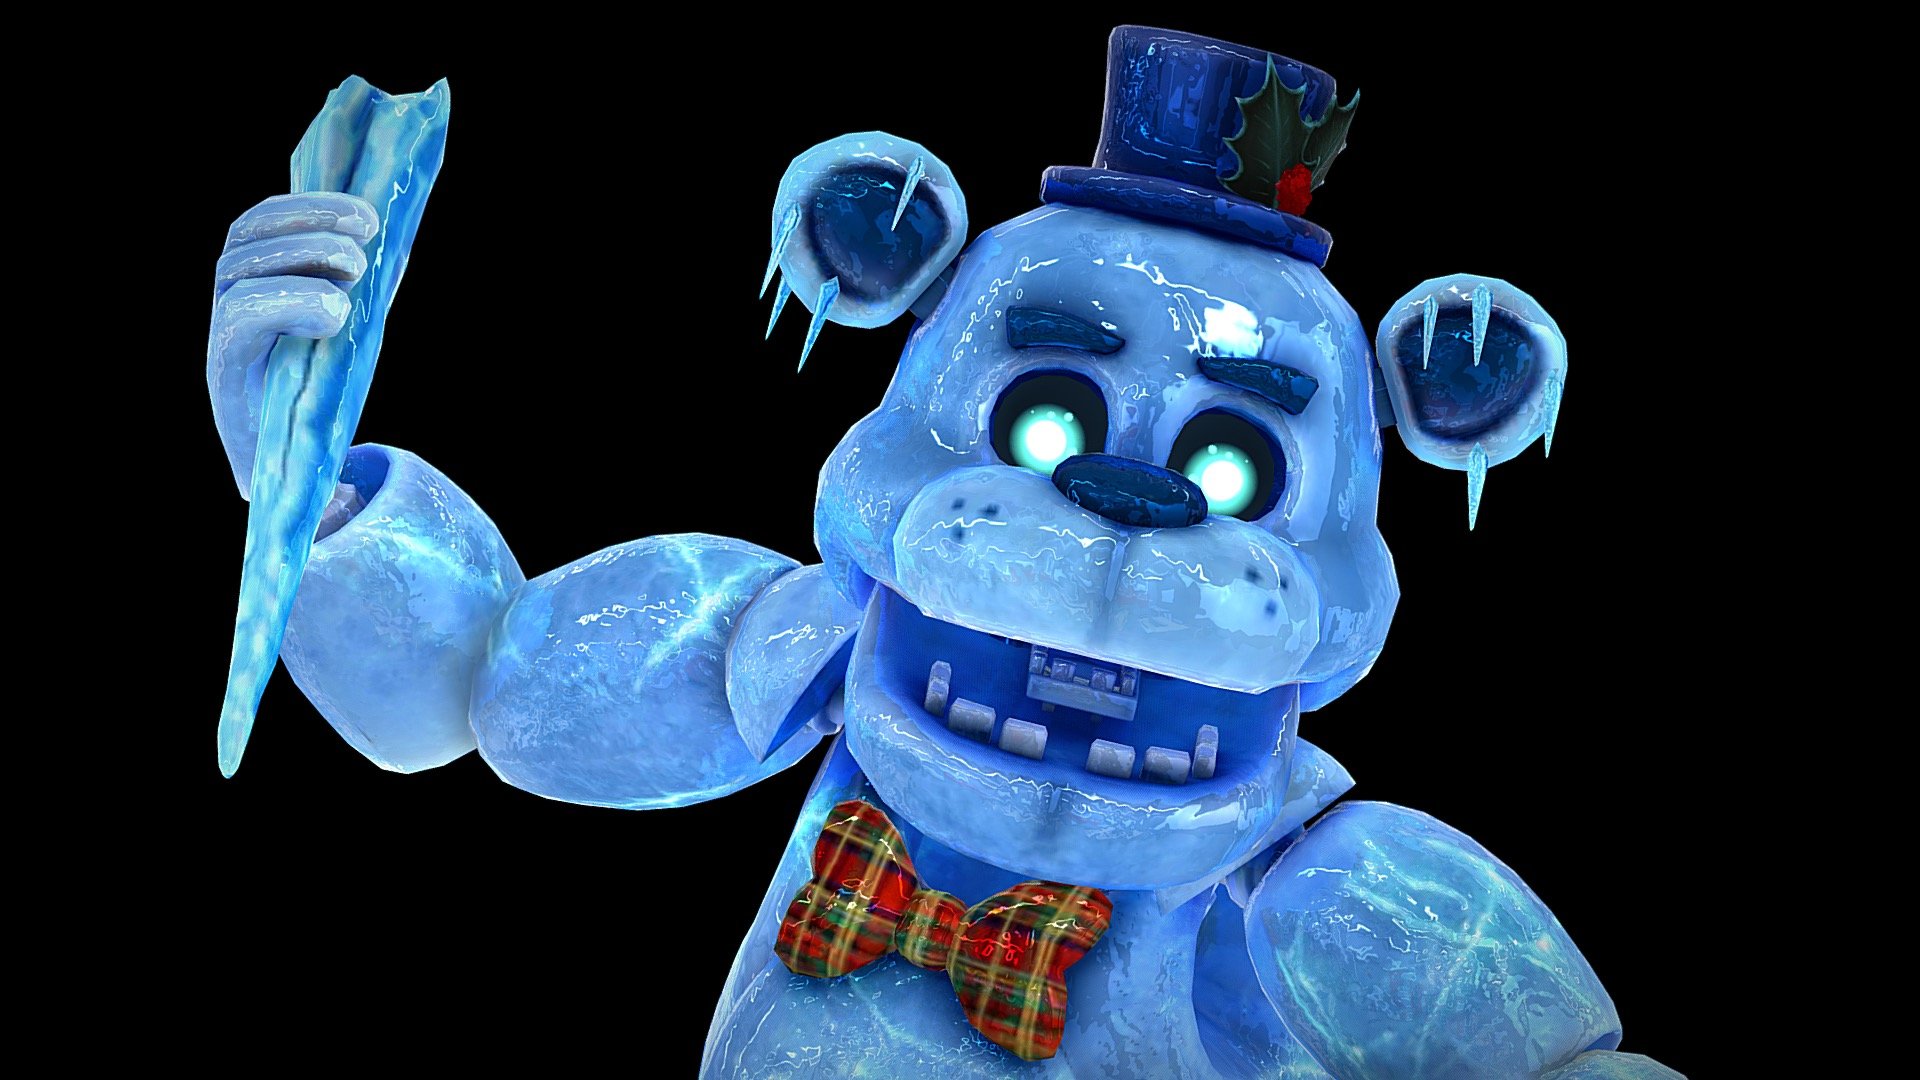 A friendly face, ready for the holidays!

He may have been out in the snow for a little long, but Freddy's always ready to celebrate the holidays!

━━━━━━━━━━━━━━━━━━━━━━━━━━━━━━━━━━━━━━━━━━

Get FNaF AR: Special Delivery on Google Play and the App Store.




https://play.google.com/store/apps/details?id=com.illumix.fnafar&amp;hl=en_CA&amp;gl=US

https://apps.apple.com/us/app/five-nights-at-freddys-ar/id1473886685
 - Freddy Frostbear - FNaF AR: Special Delivery - Download Free 3D model by Priorities 3d model